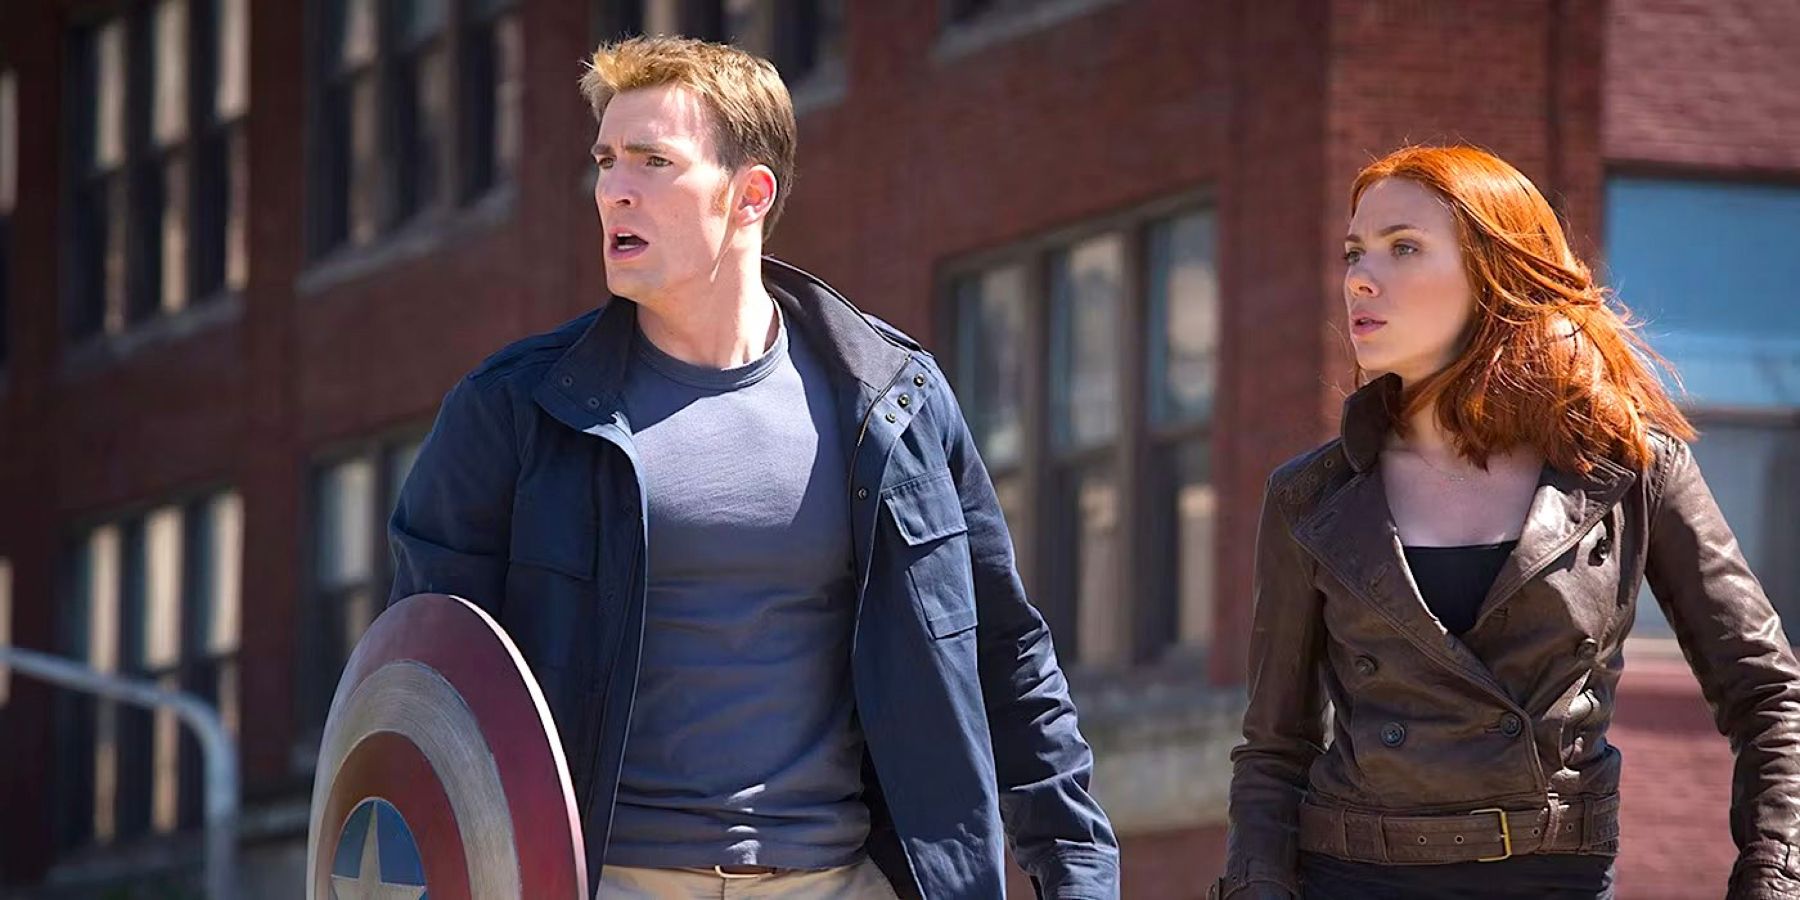 Captain America (played by actor Chris Evans) and Black Widow (played by actor Scarlett Johansson), catch their breath in the middle of a street fight in Captain America: The Winter Soldier.